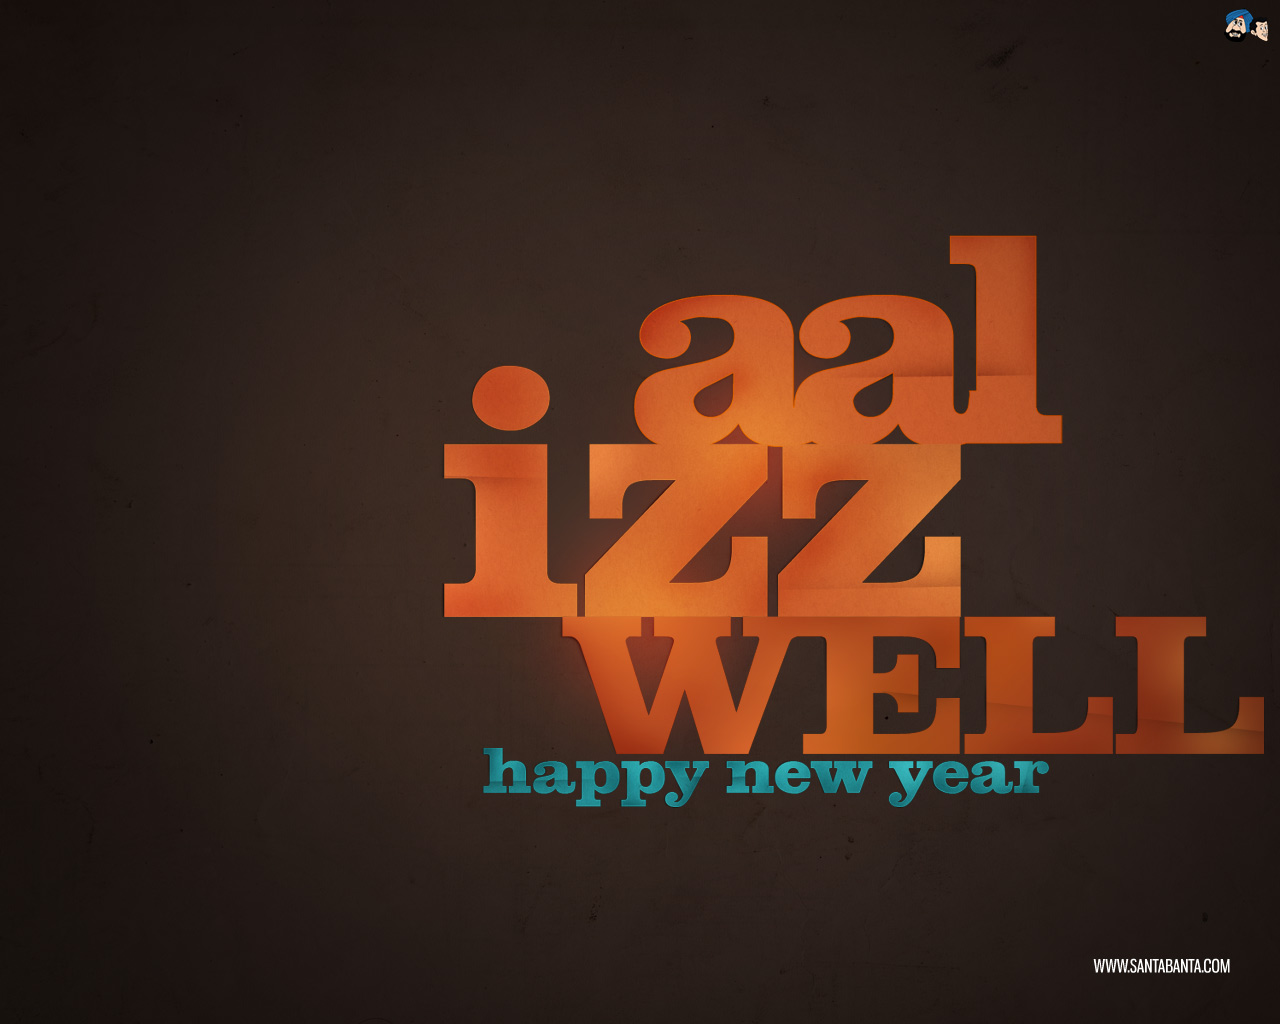 all is well wallpaper,text,font,graphic design,logo,sky